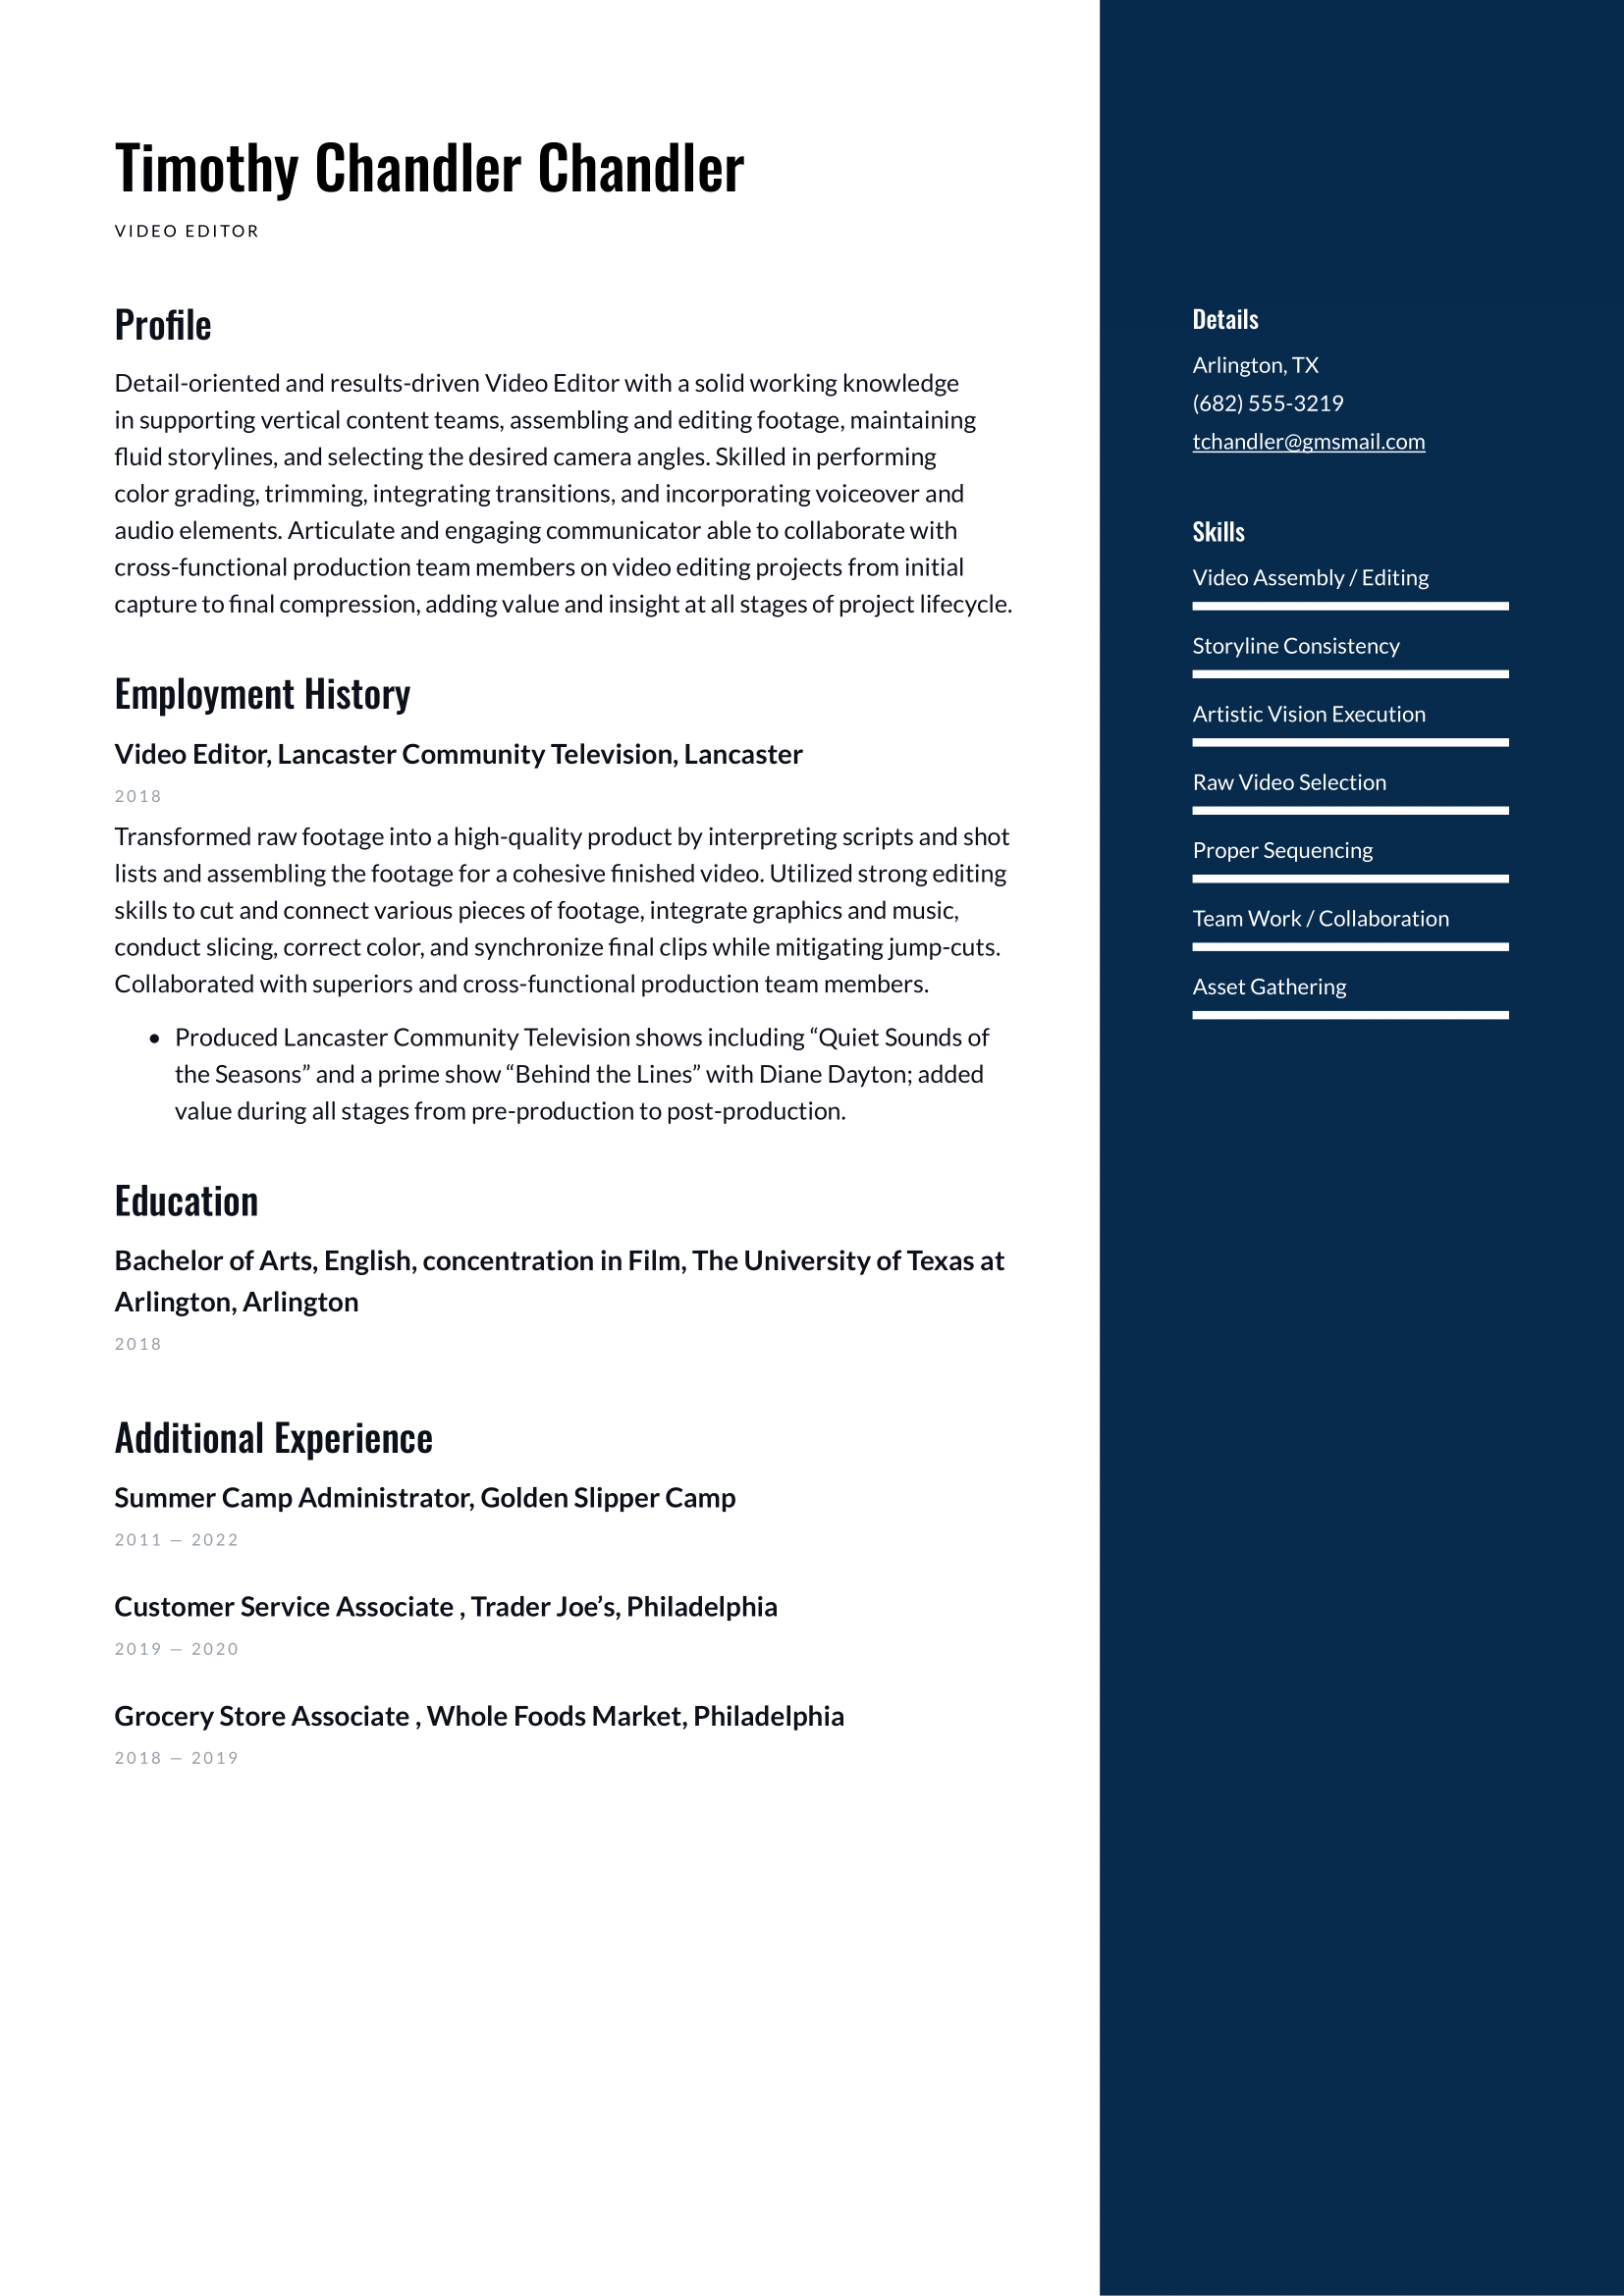 Video Editor Resume Example & Writing Guide